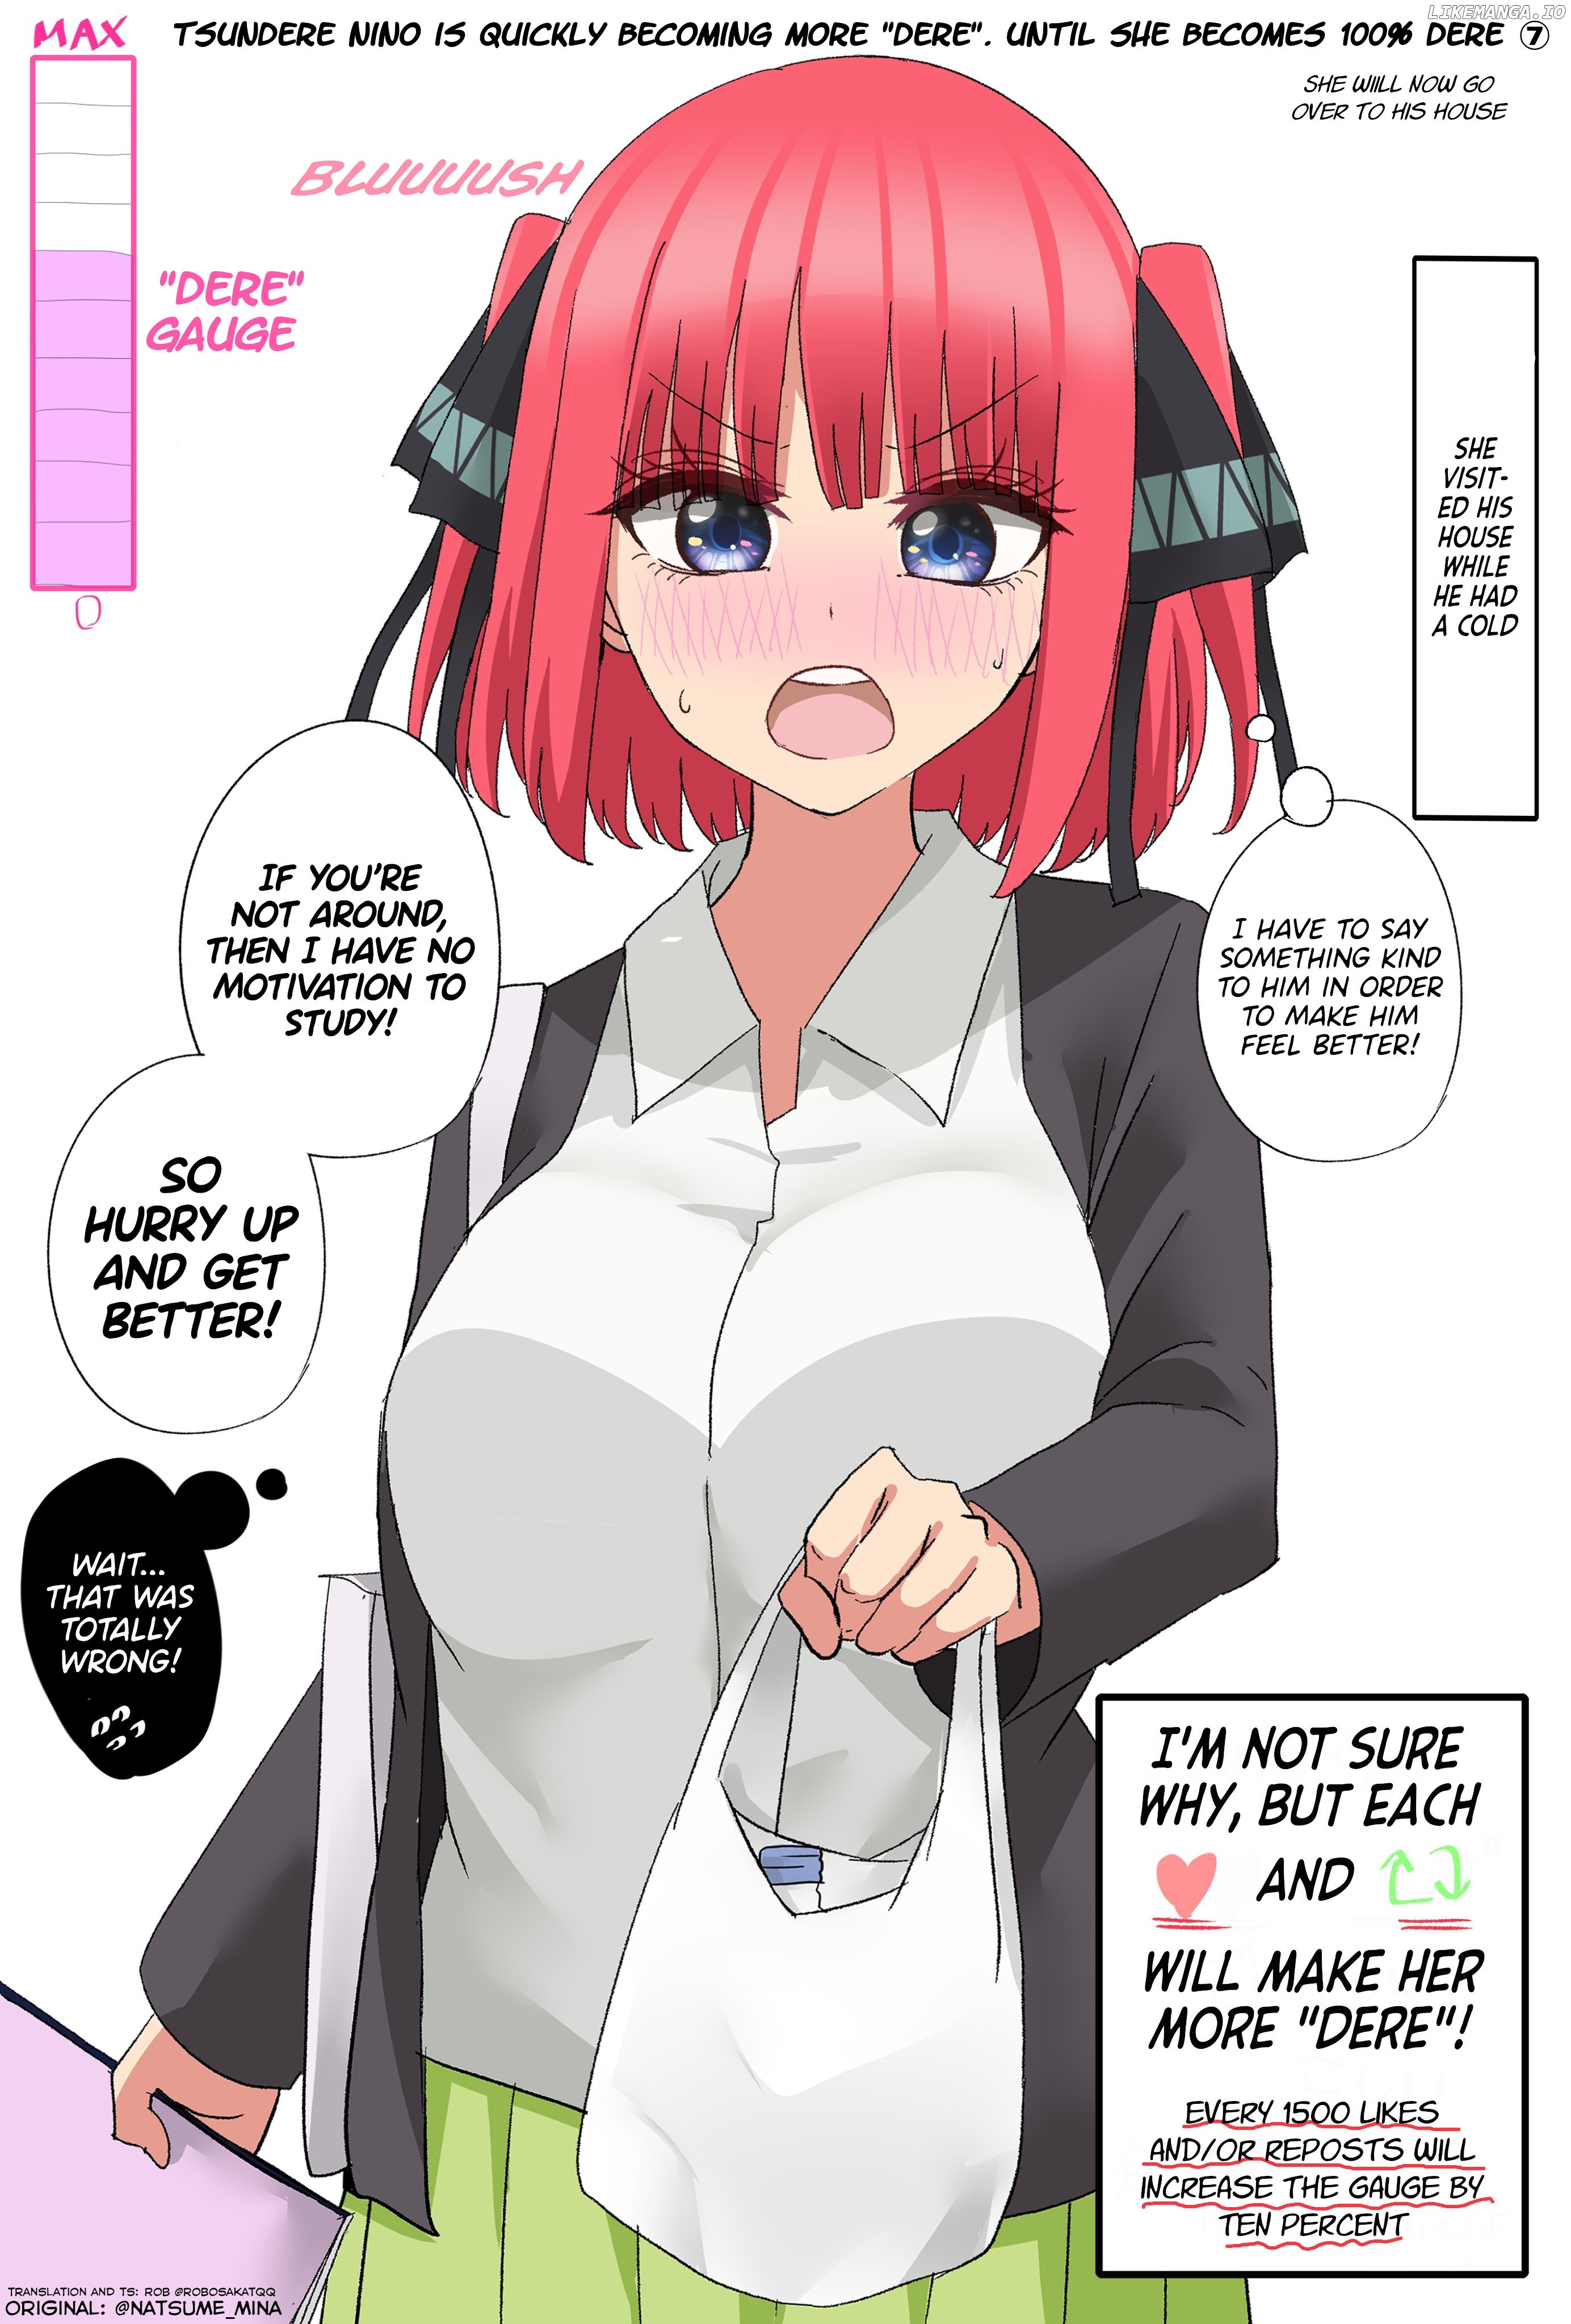 5Toubun No Hanayome - Tsundere Nino Rapidly Becomes More And More "dere" Through Likes And Reposts (Doujinshi) chapter 7 - page 1